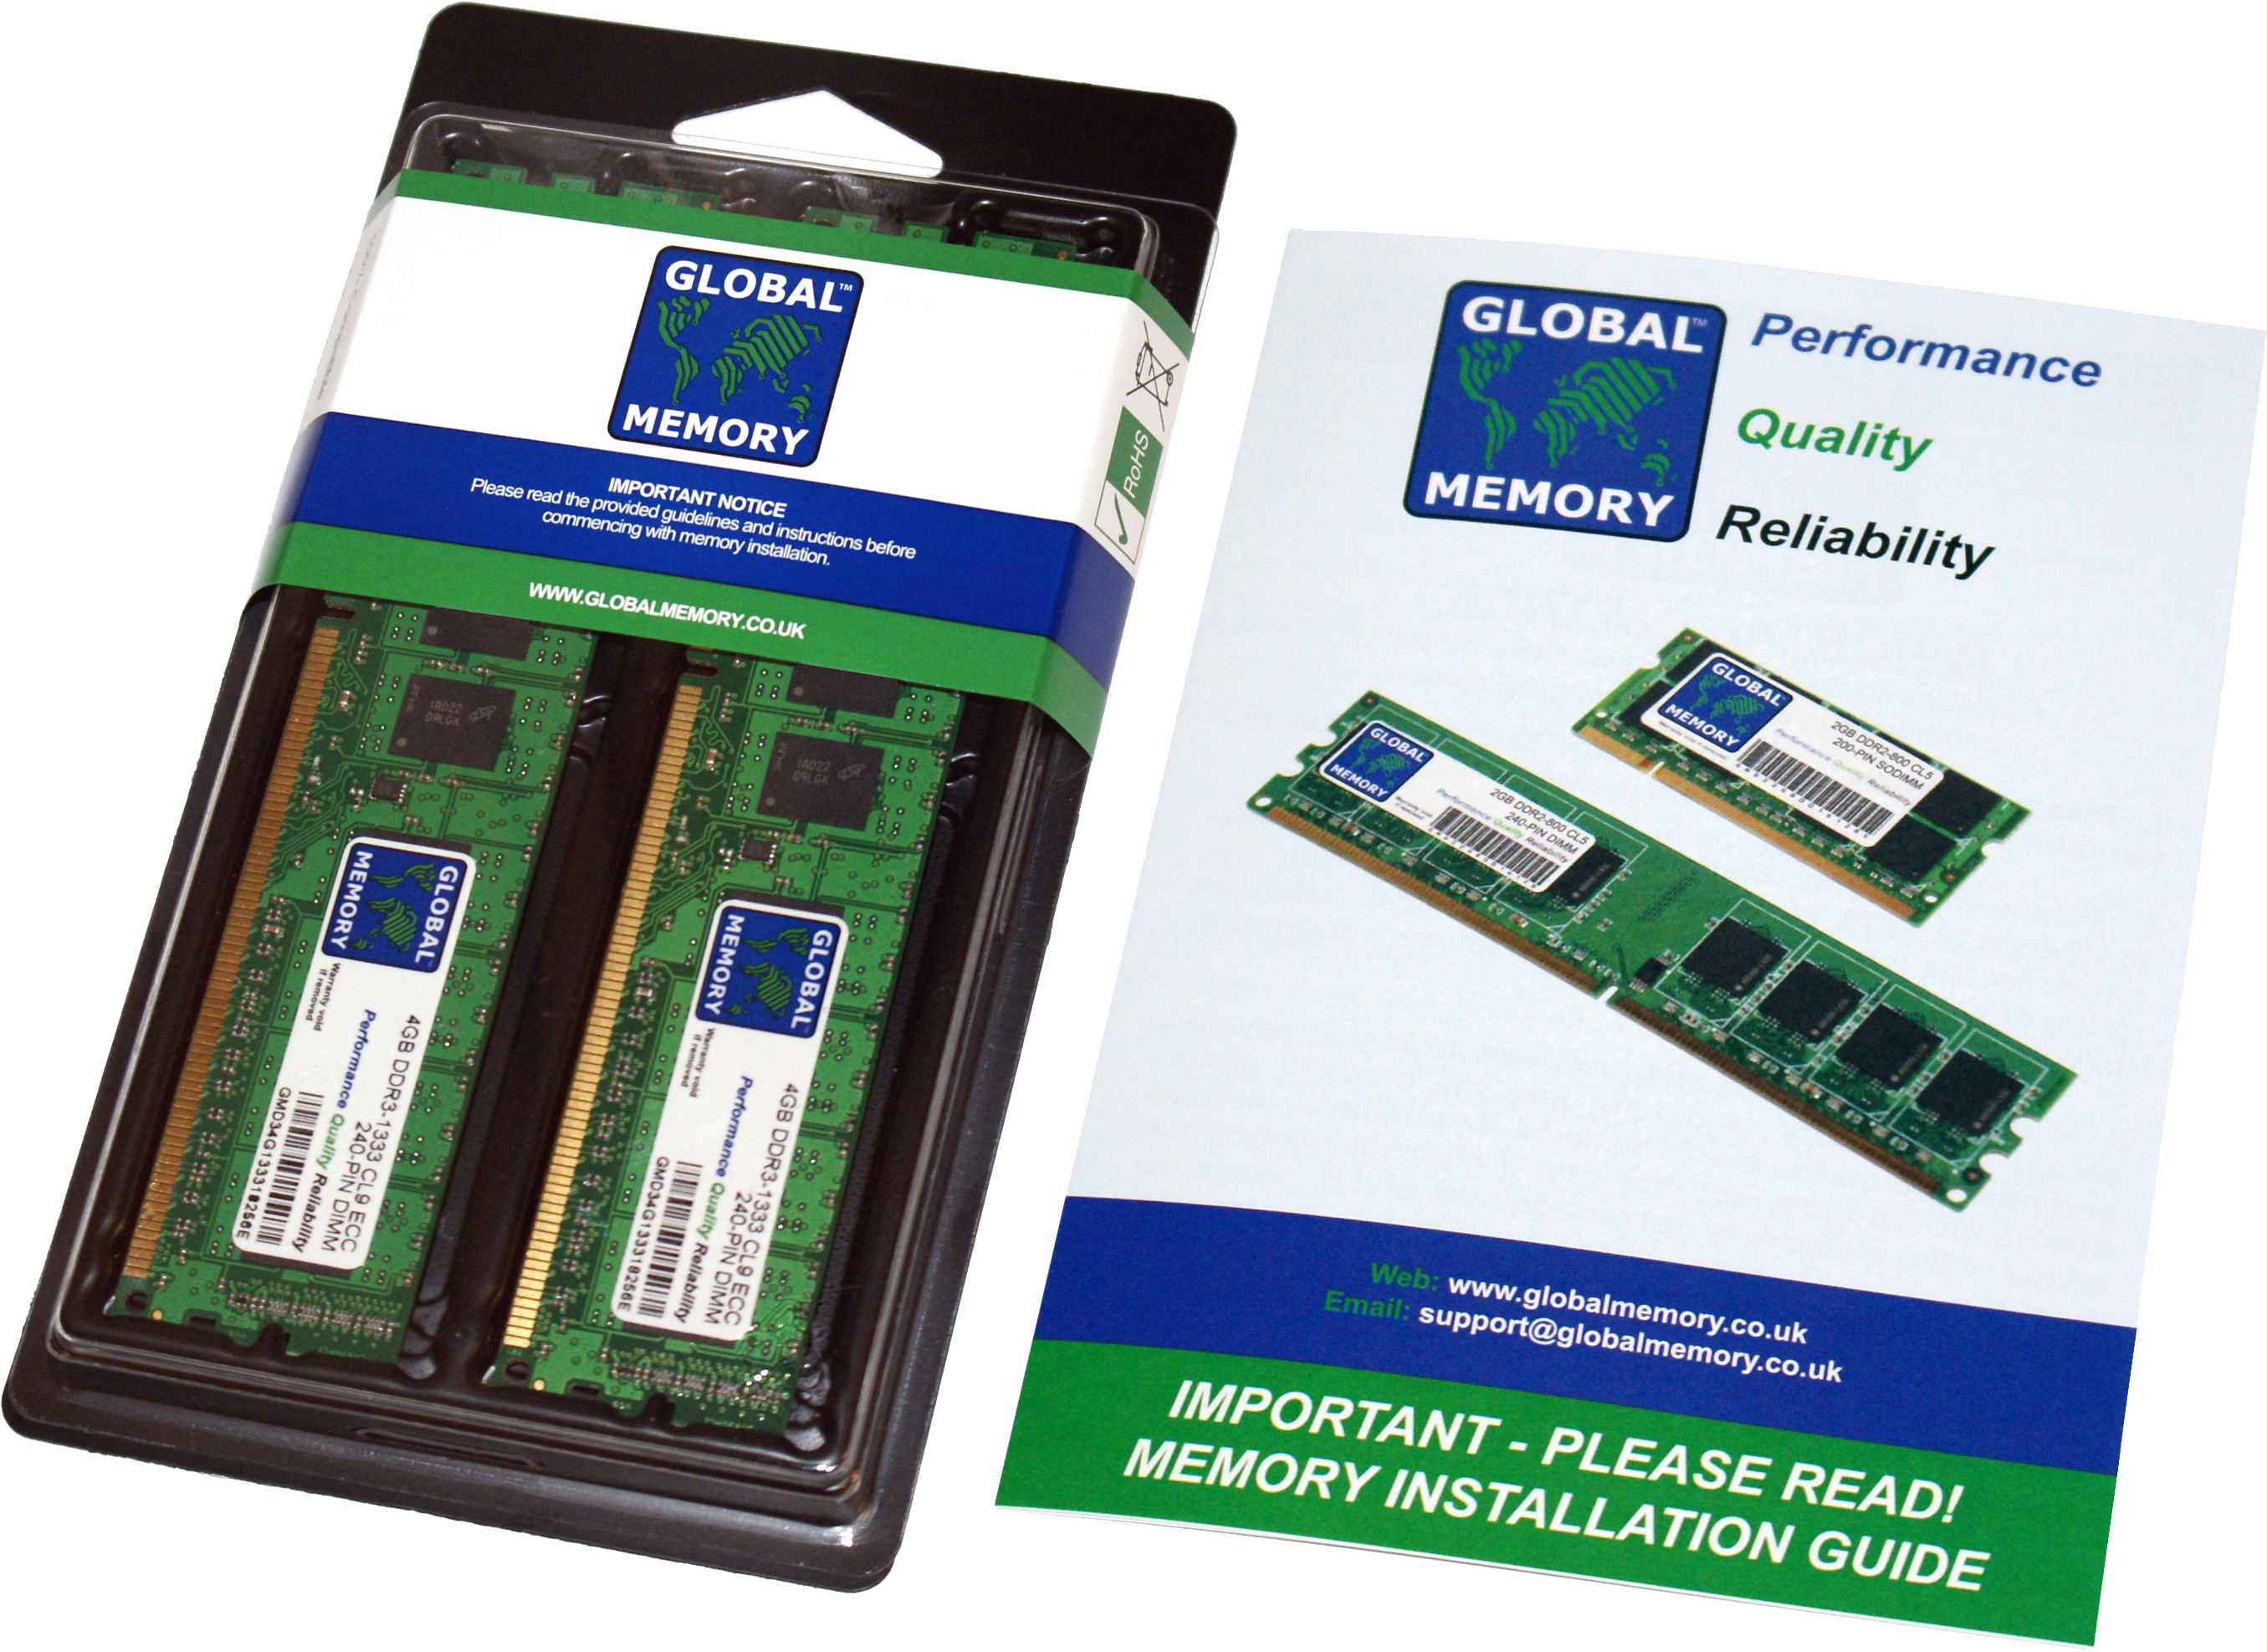 8GB (2 x 4GB) DDR3 1866MHz PC3-14900 240-PIN ECC DIMM (UDIMM) MEMORY RAM KIT FOR ACER SERVERS/WORKSTATIONS